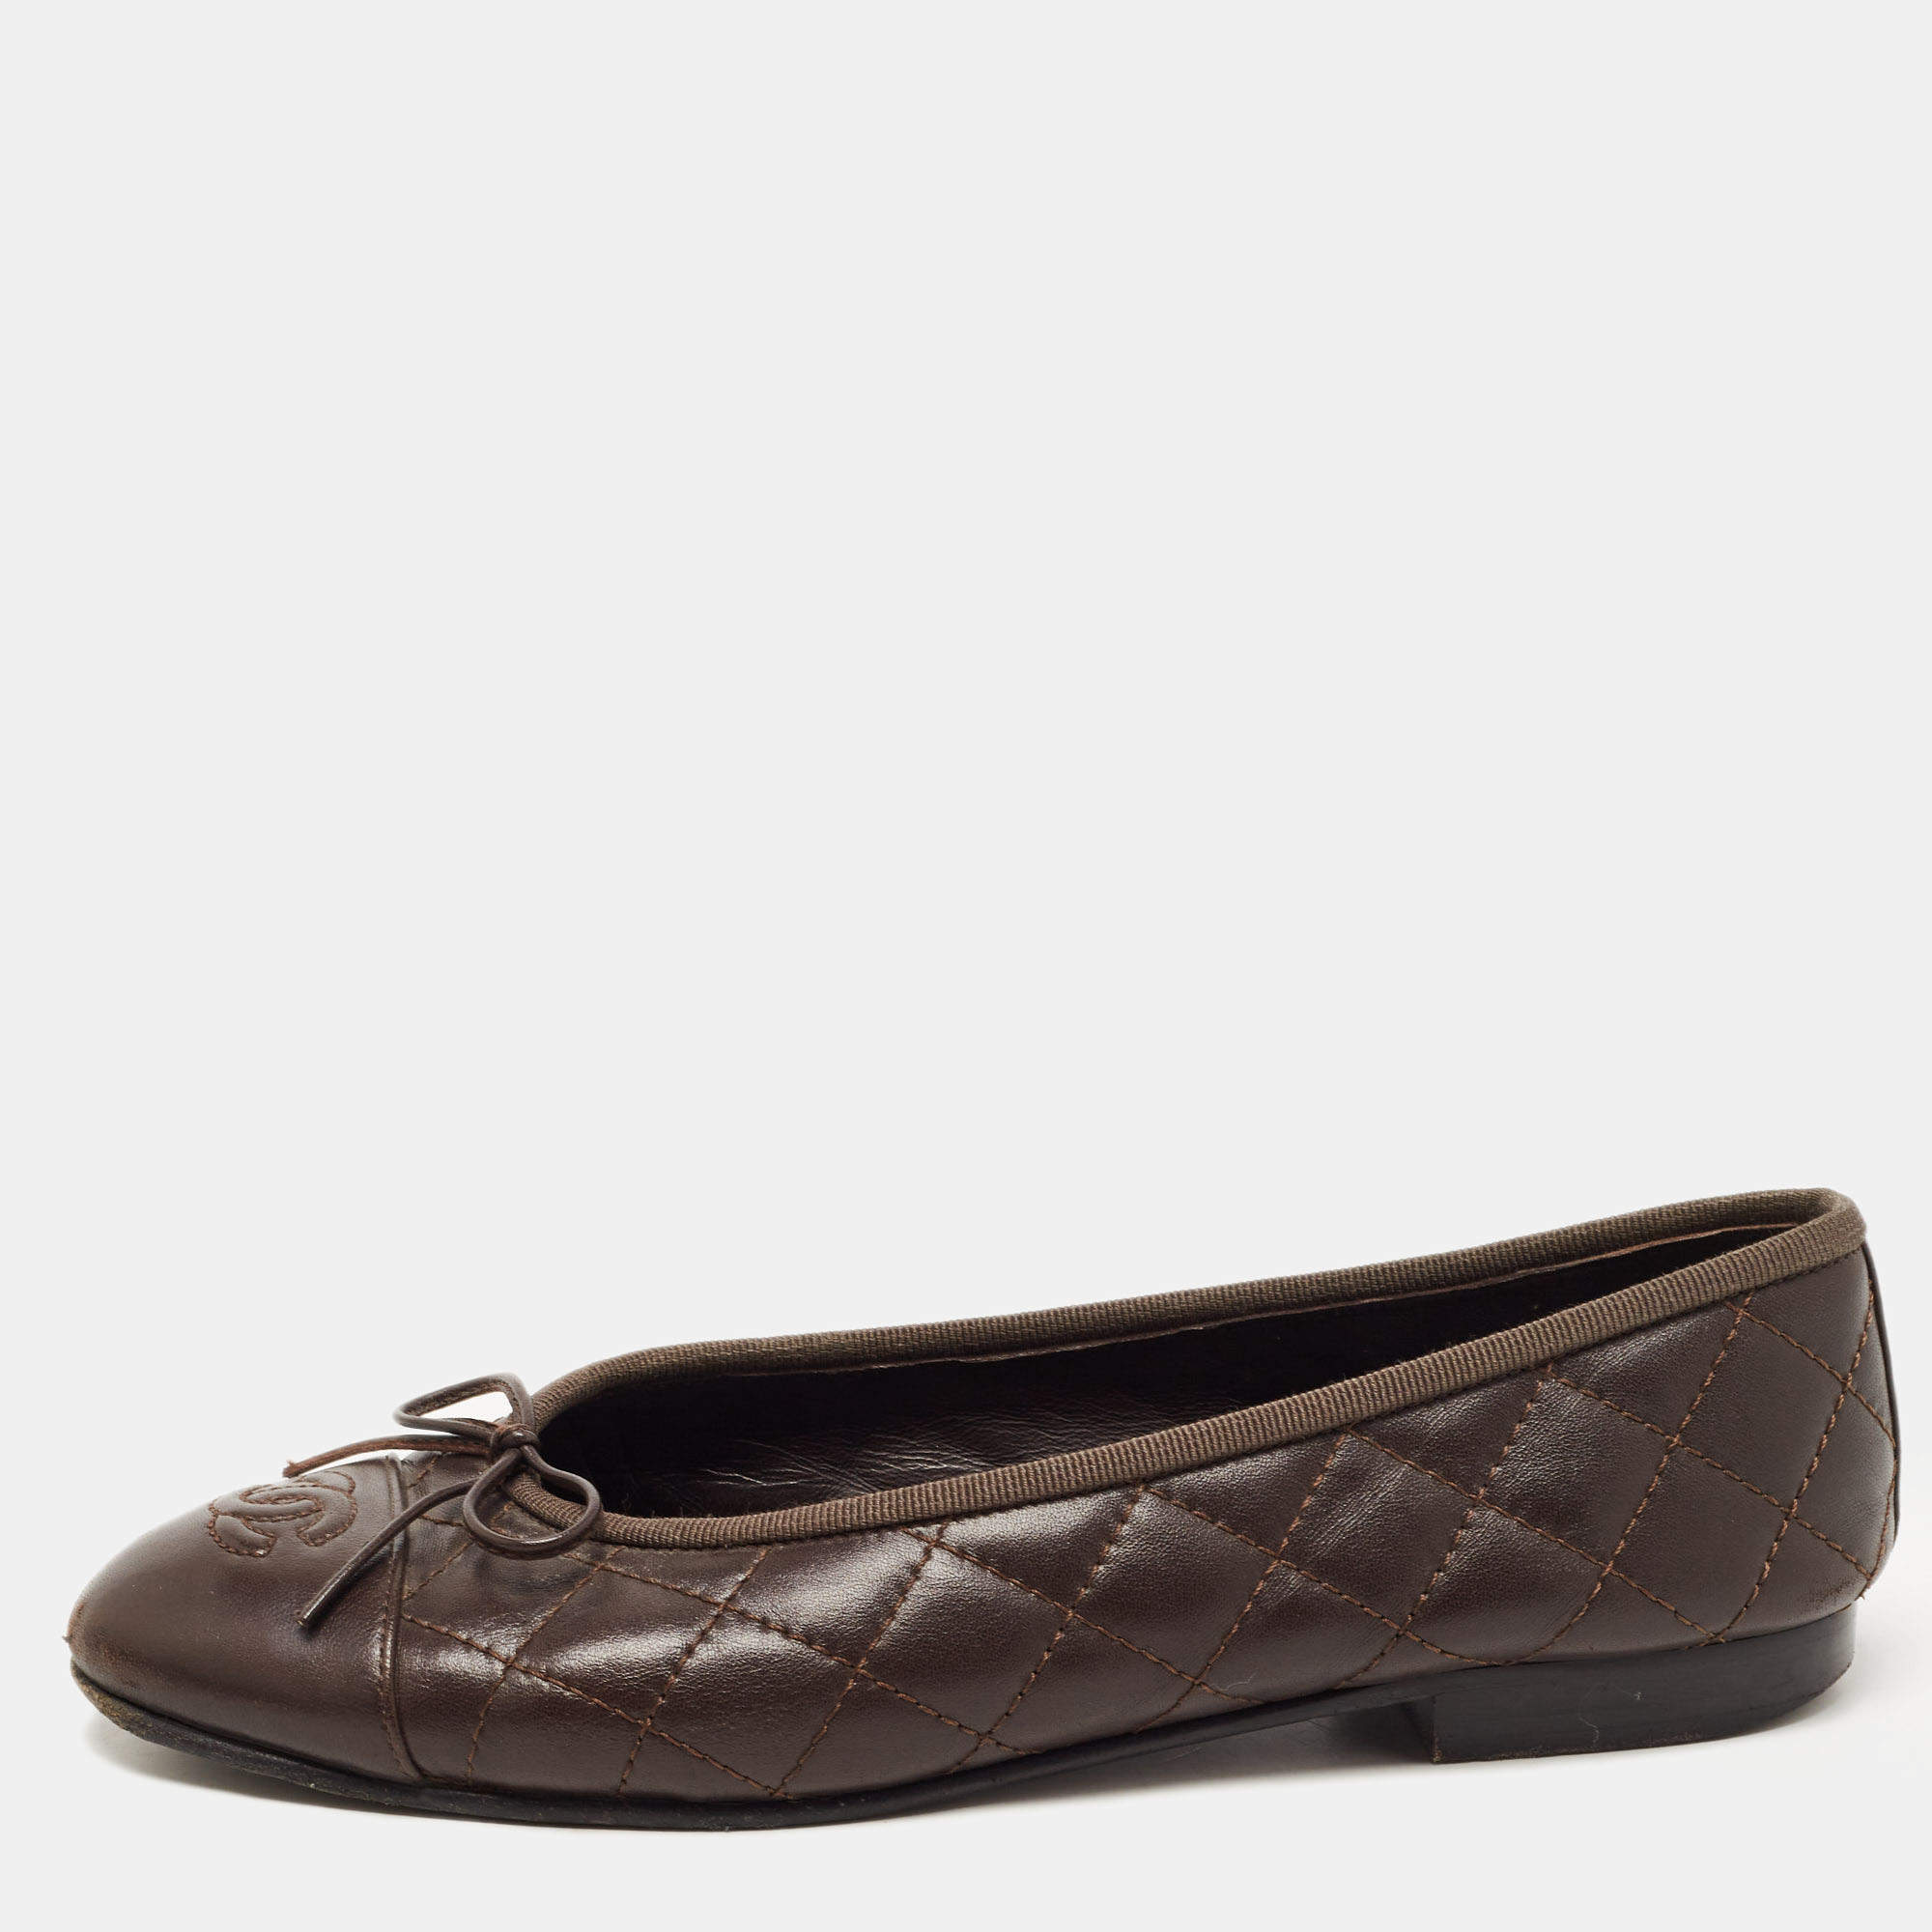 | Leather TLC Flats Size Chanel Bow CC 37.5 Chanel Dark Brown Quilted Ballet